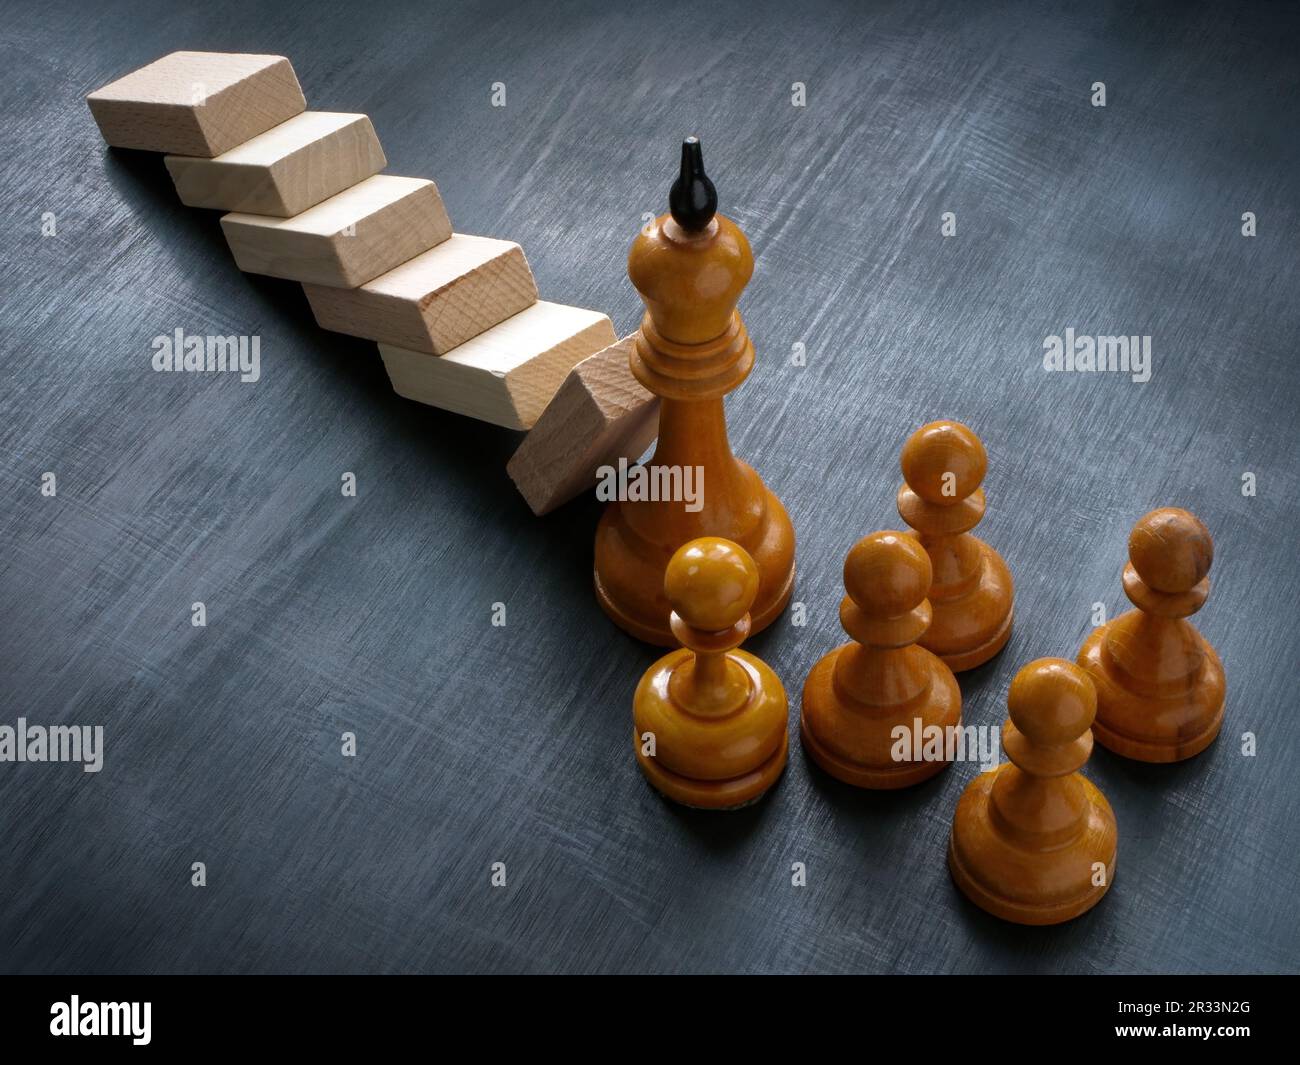 The chess king holds the fallen blocks as a symbol of leadership and crisis management. Stock Photo